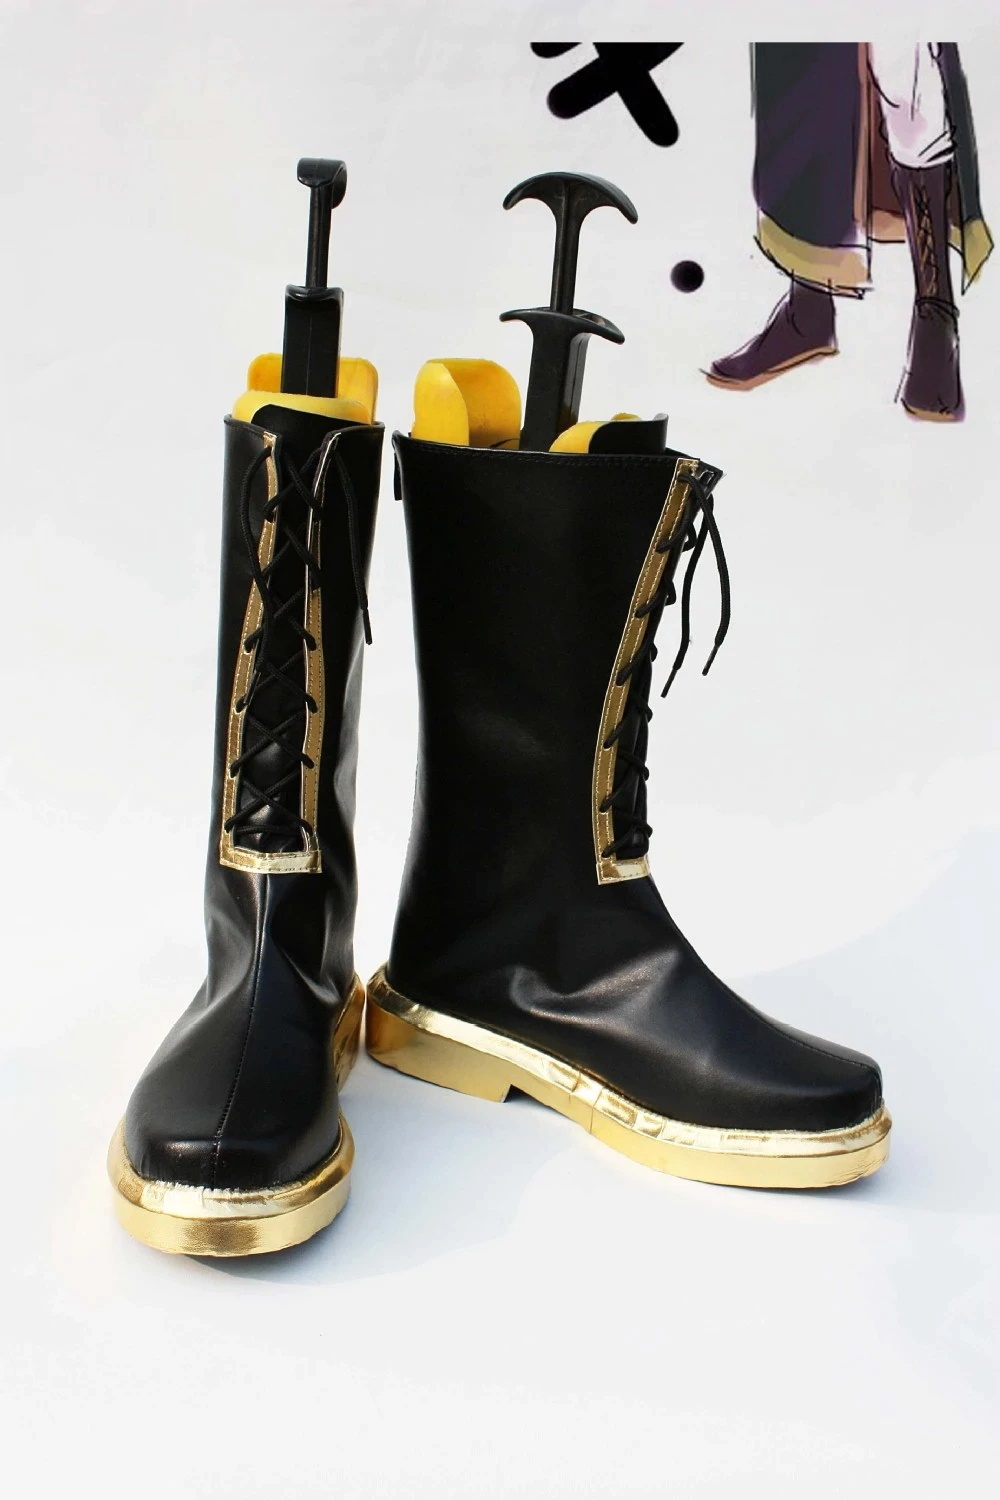 vocaloid megurine luka version 2 cosplay shoes boots